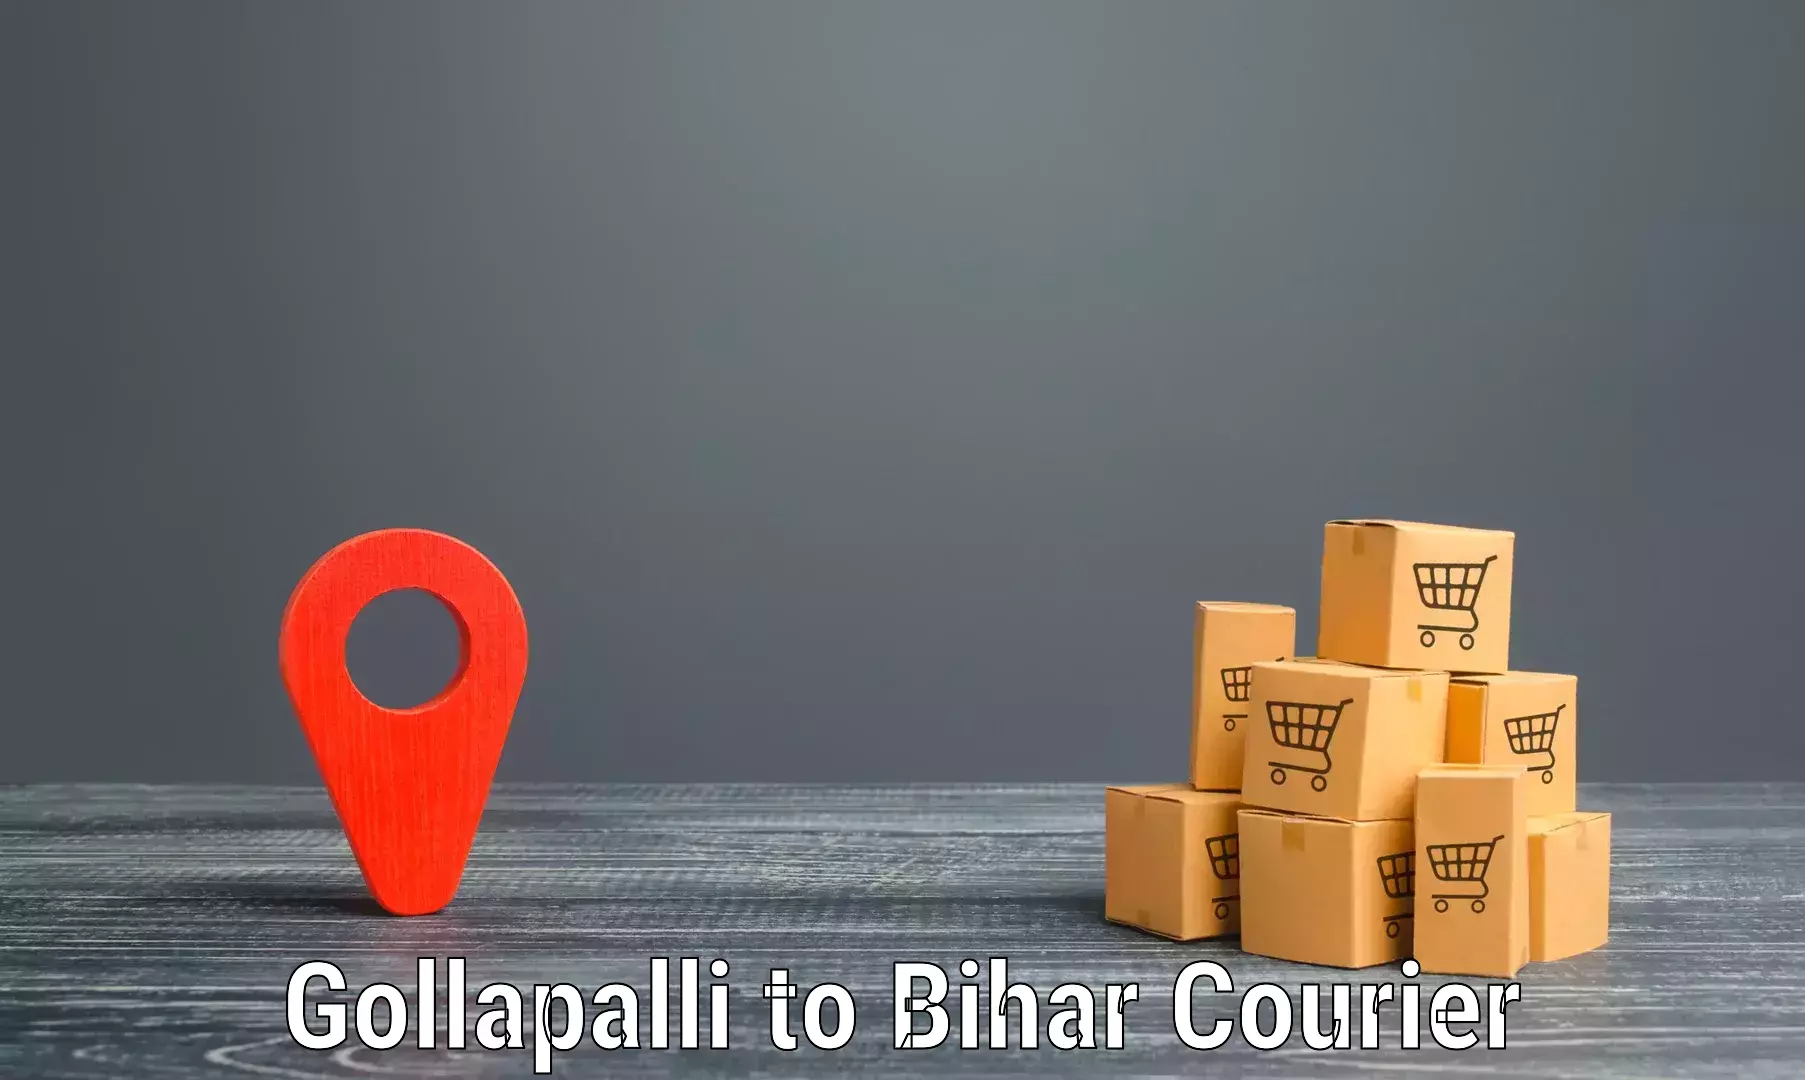 Next-generation courier services Gollapalli to Jhajha